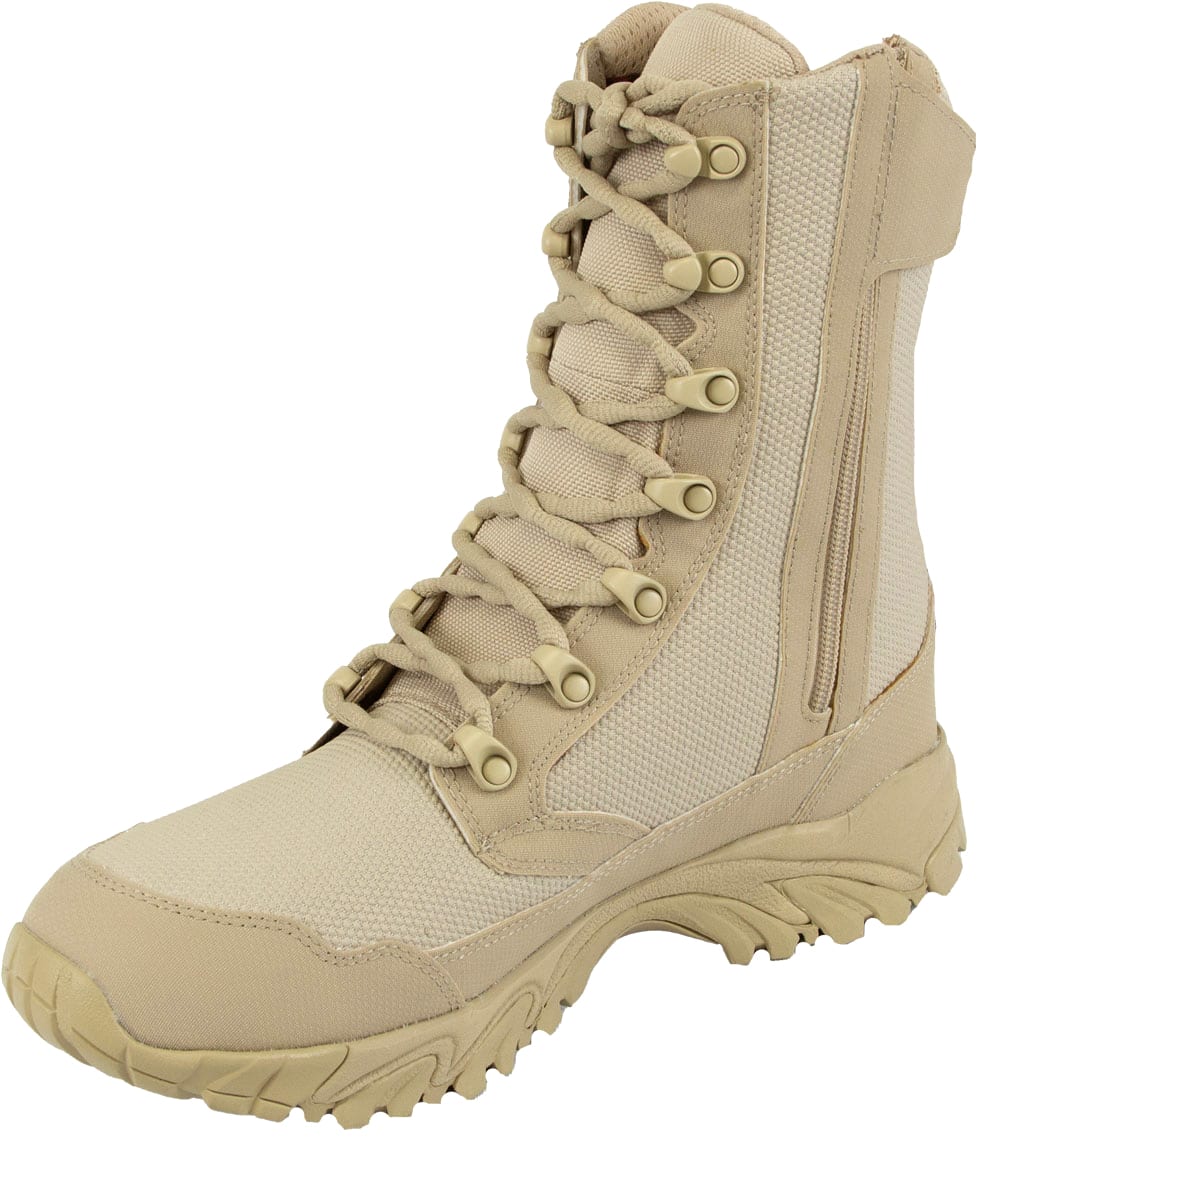 military zip up boots